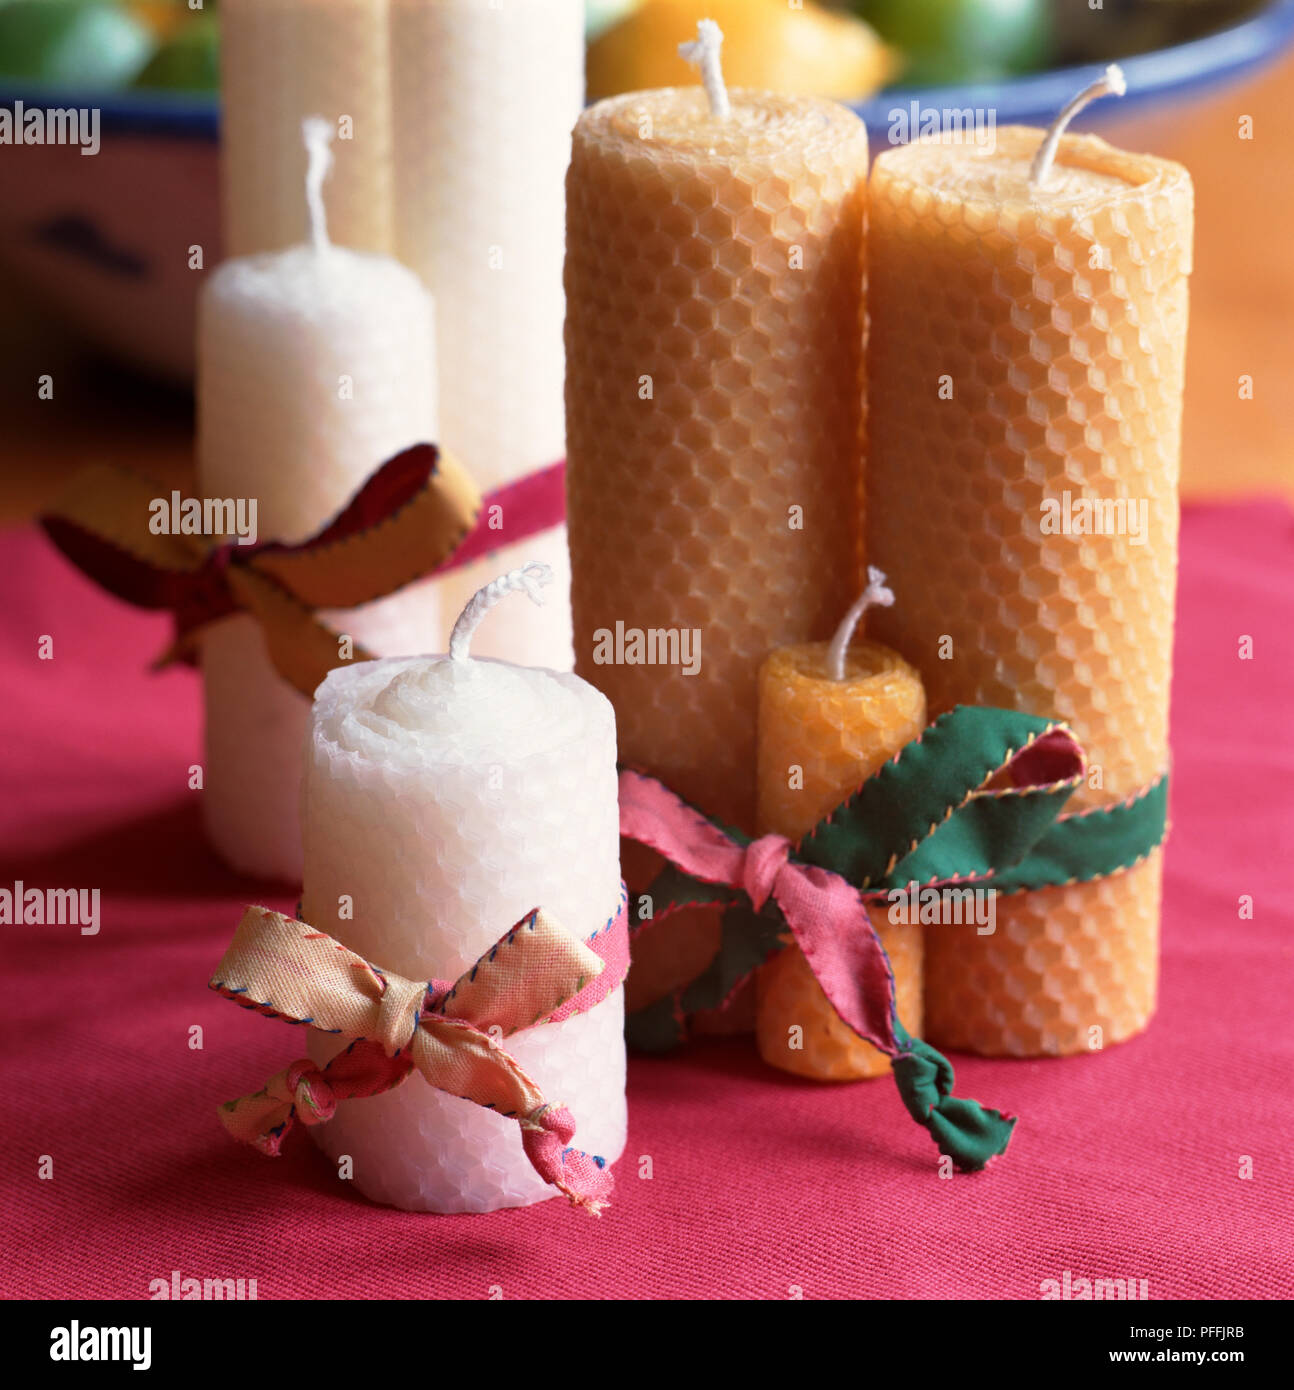 Assorted yellow and white rolled beeswax candles, honeycomb patterned surface, decorative ribbons tying candles together, new white wicks, standing on fuscia pink material. Stock Photo